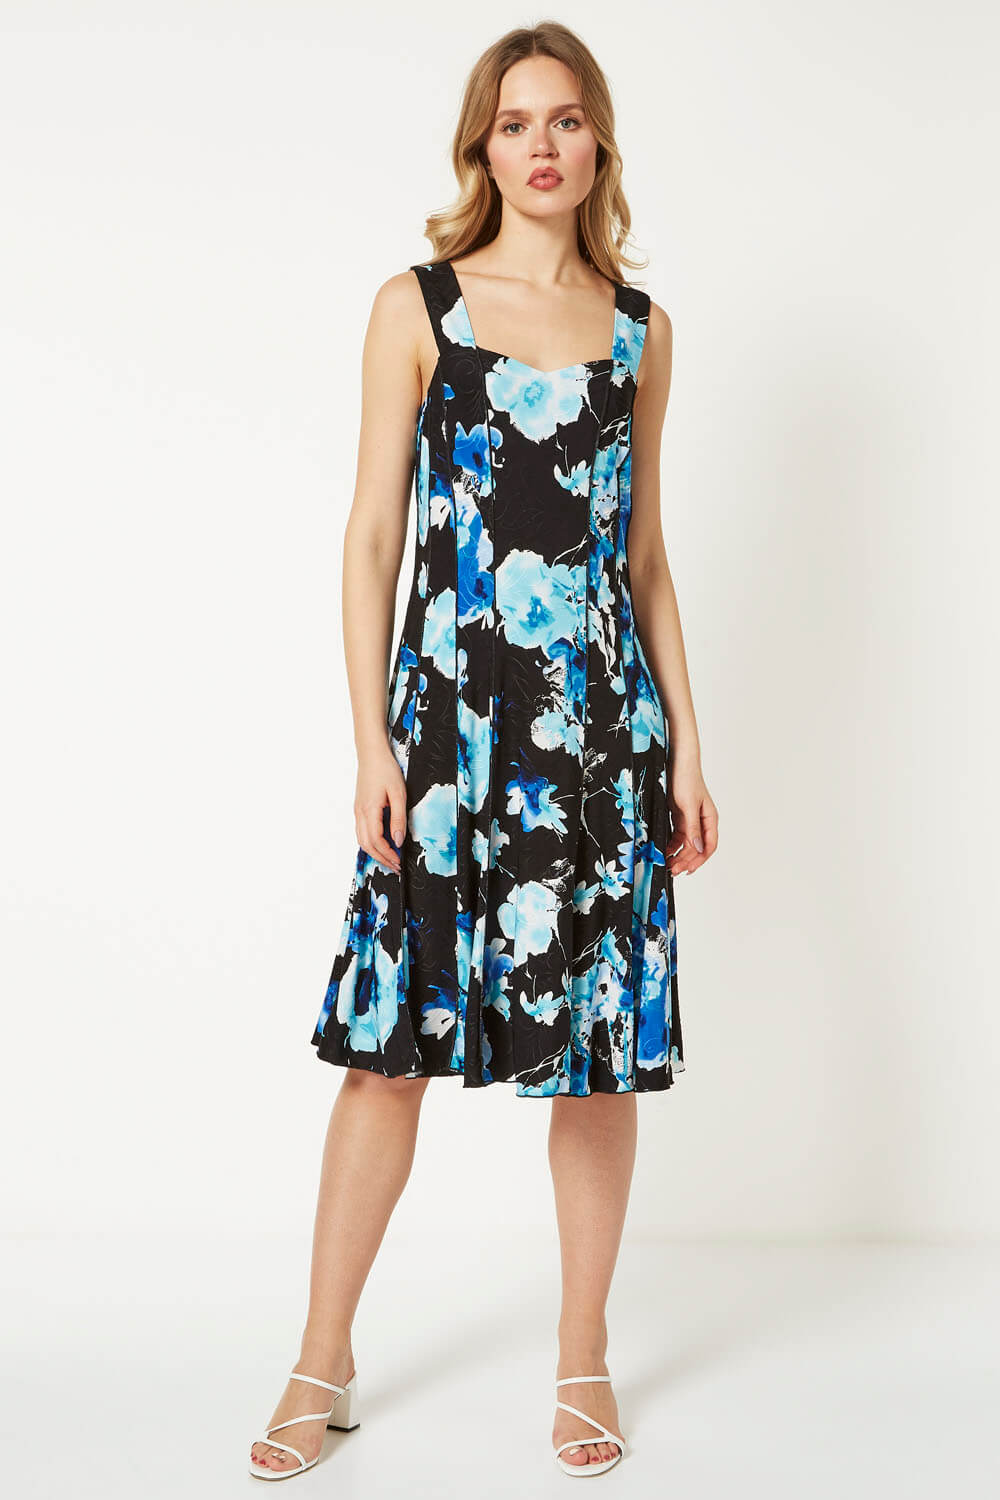 Black Floral Print Panel Fit and Flare Dress, Image 3 of 4